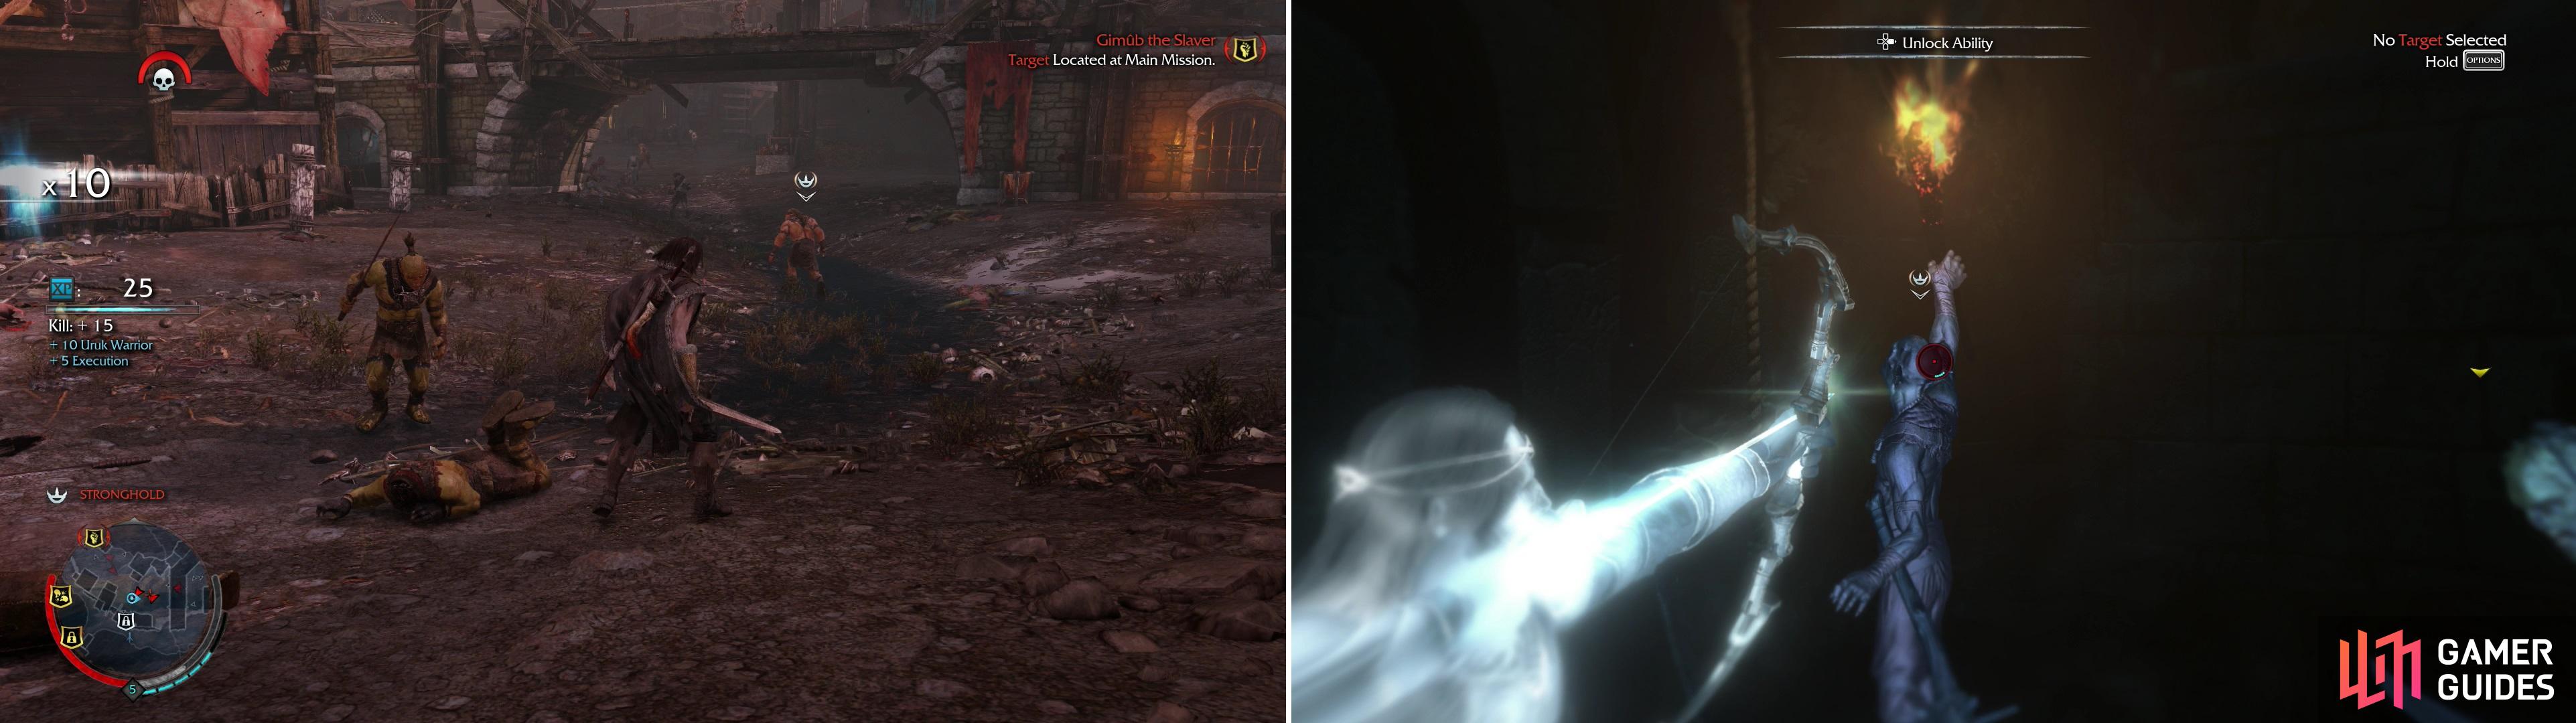 In Strongholds, tattle-tale Uruks will runs off to sound the alarm (left) and can be spotted by the symbol over their heads. If the alarm is raised (right) you'll have to fight through respawning hordes of Uruks.